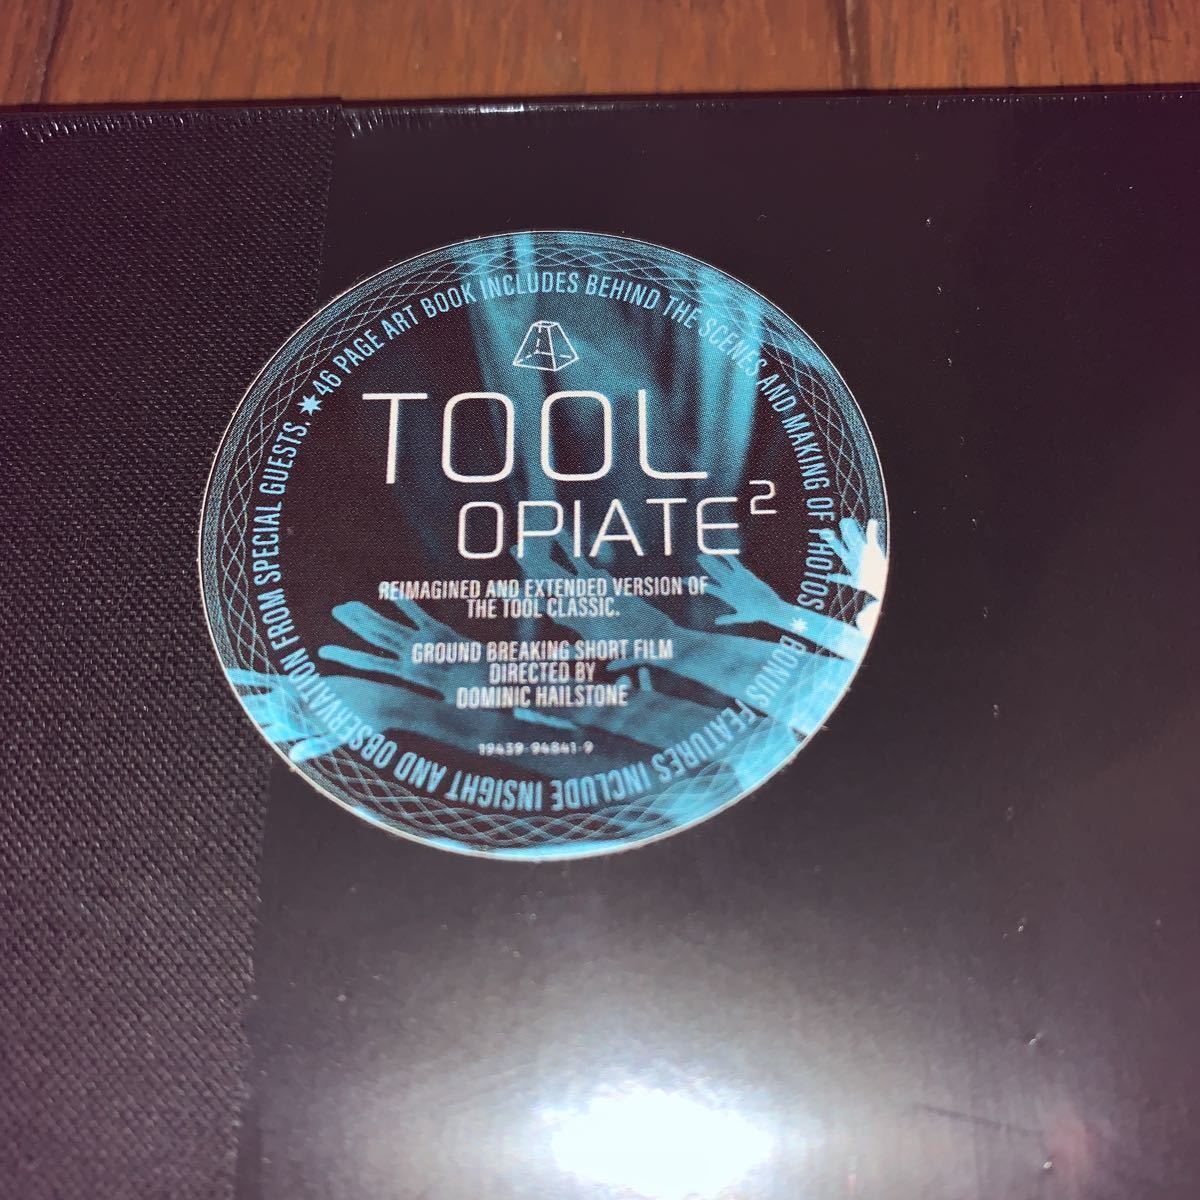 TOOL Opiate2 Blu-ray Disc 完全生産限定盤 新品未開封 トゥール オピエイト・スクワード_画像2